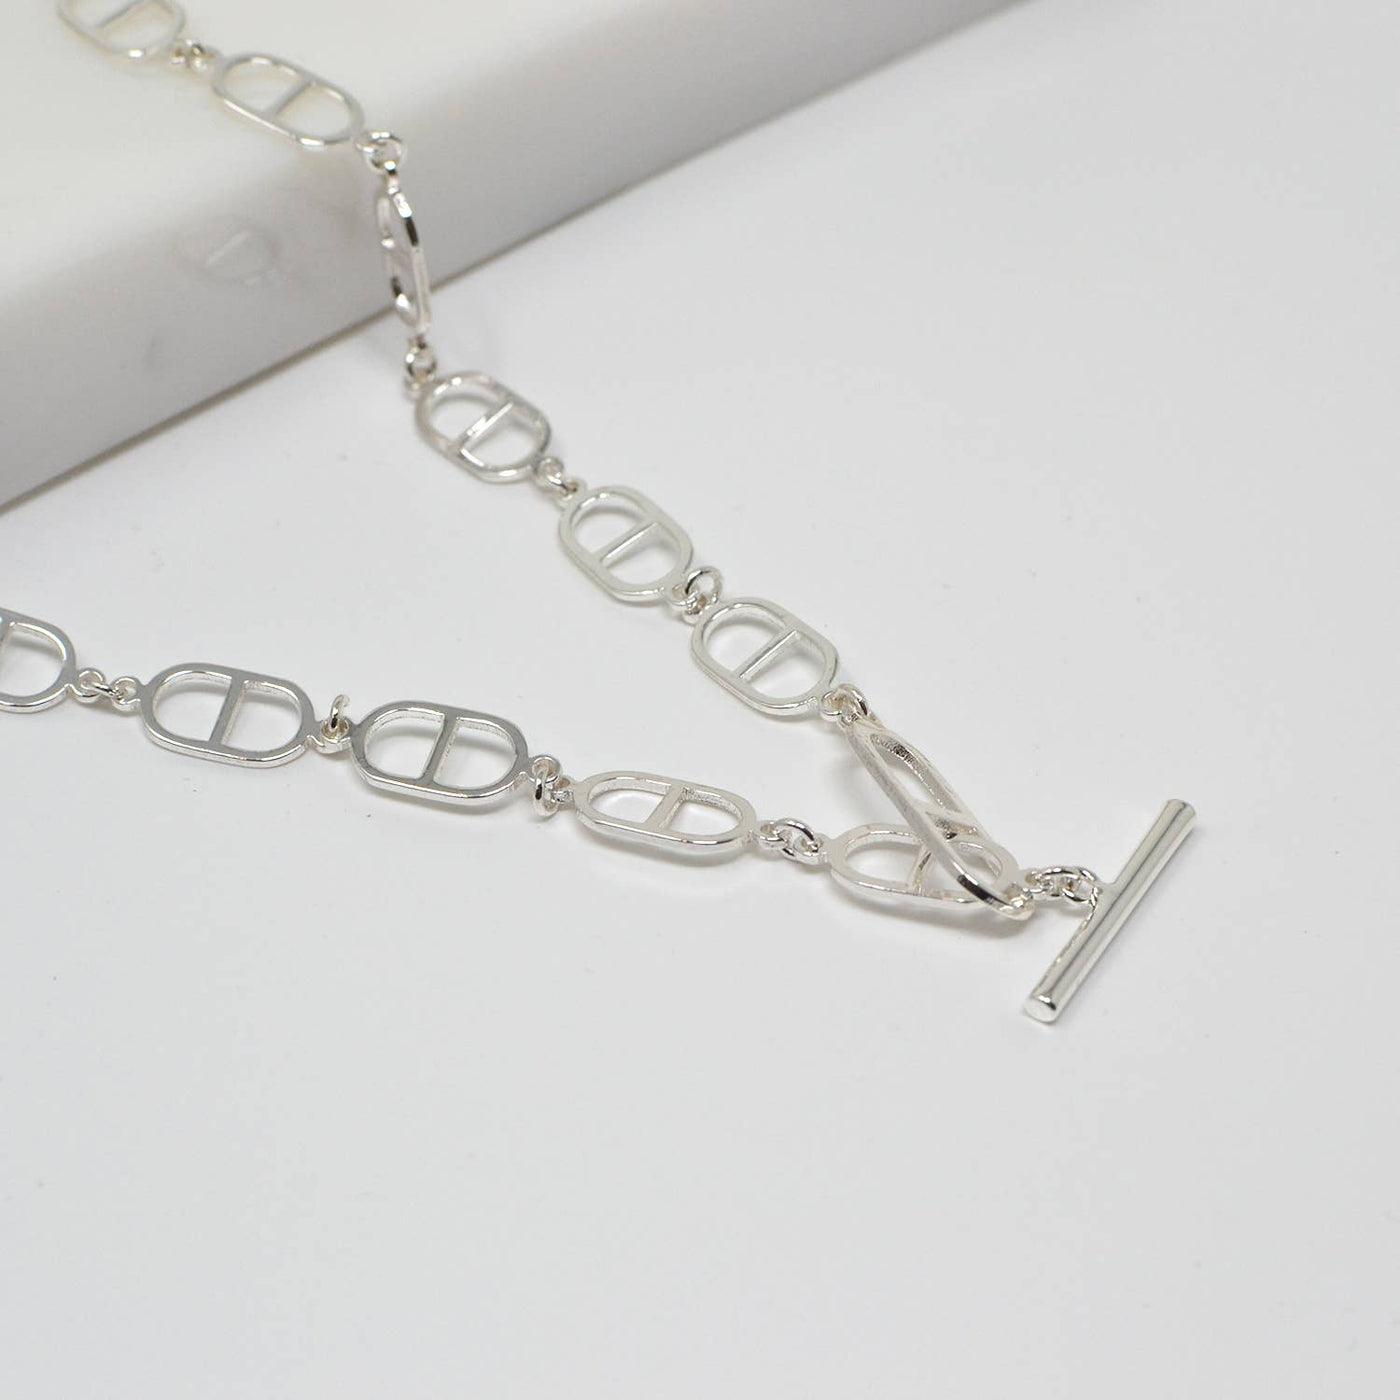 All Linked in Silver Necklace